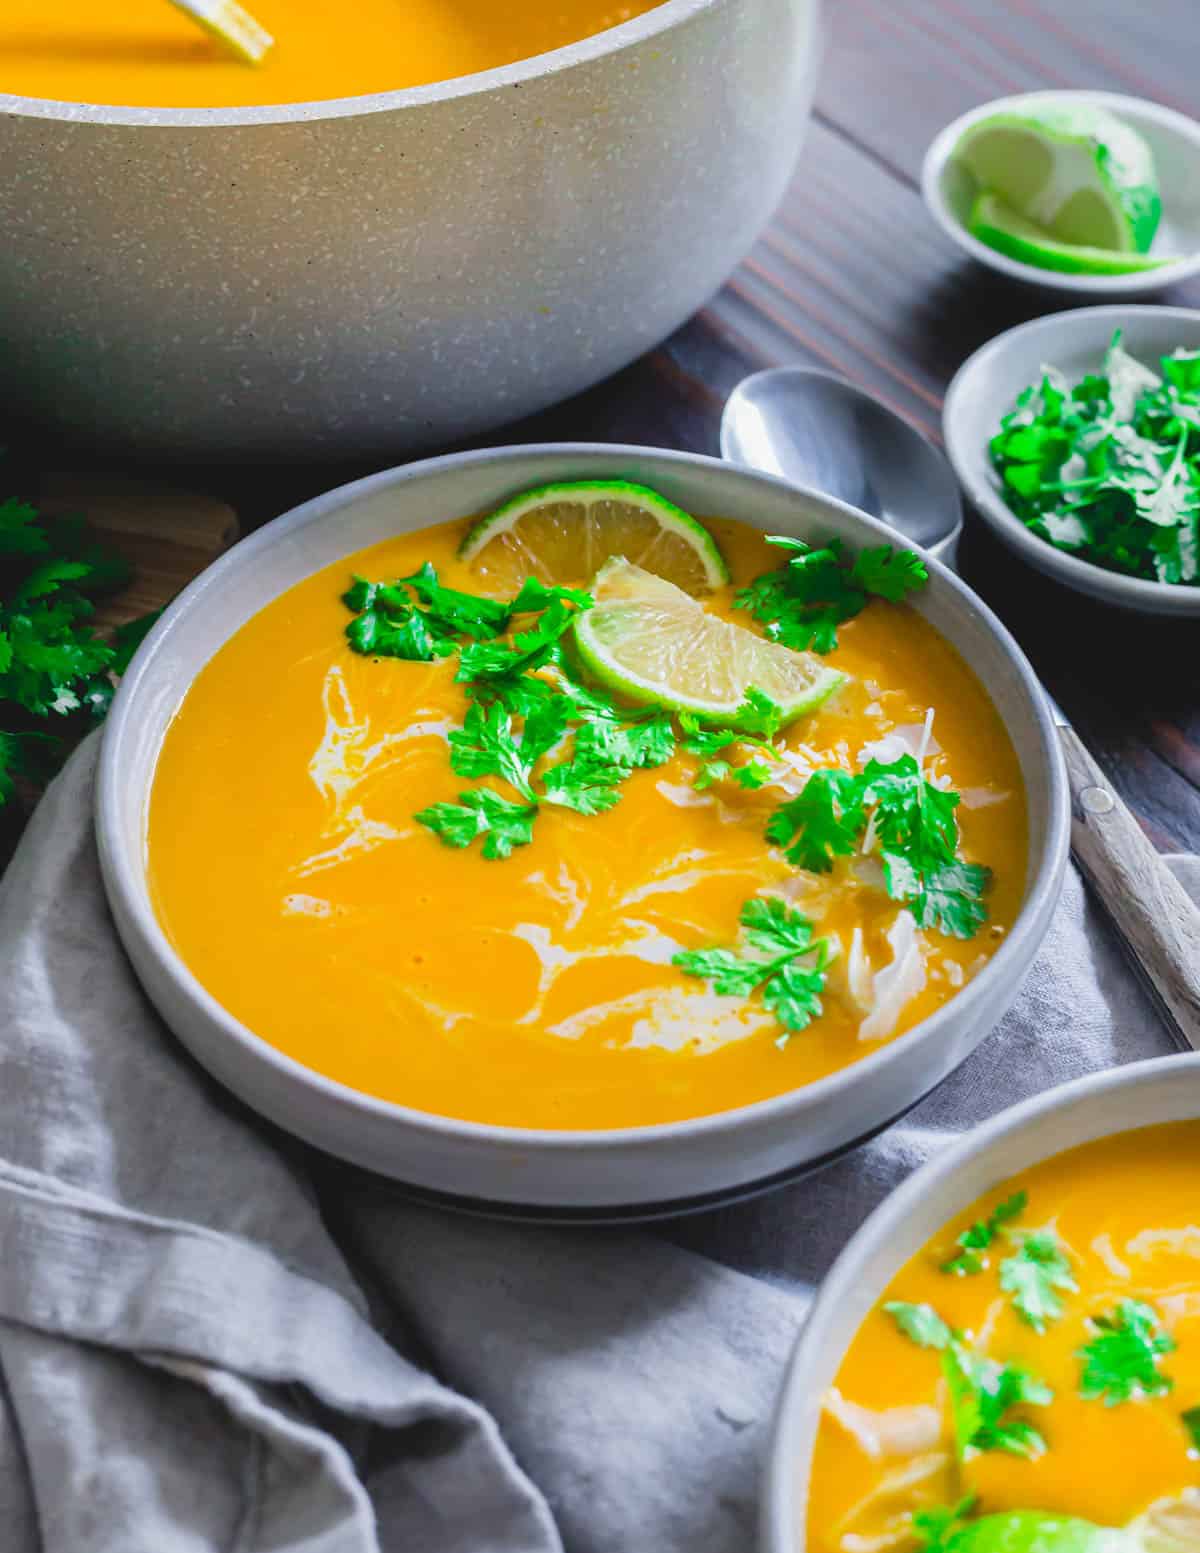 Buttercup squash soup garnished with cilantro, lime and coconut.